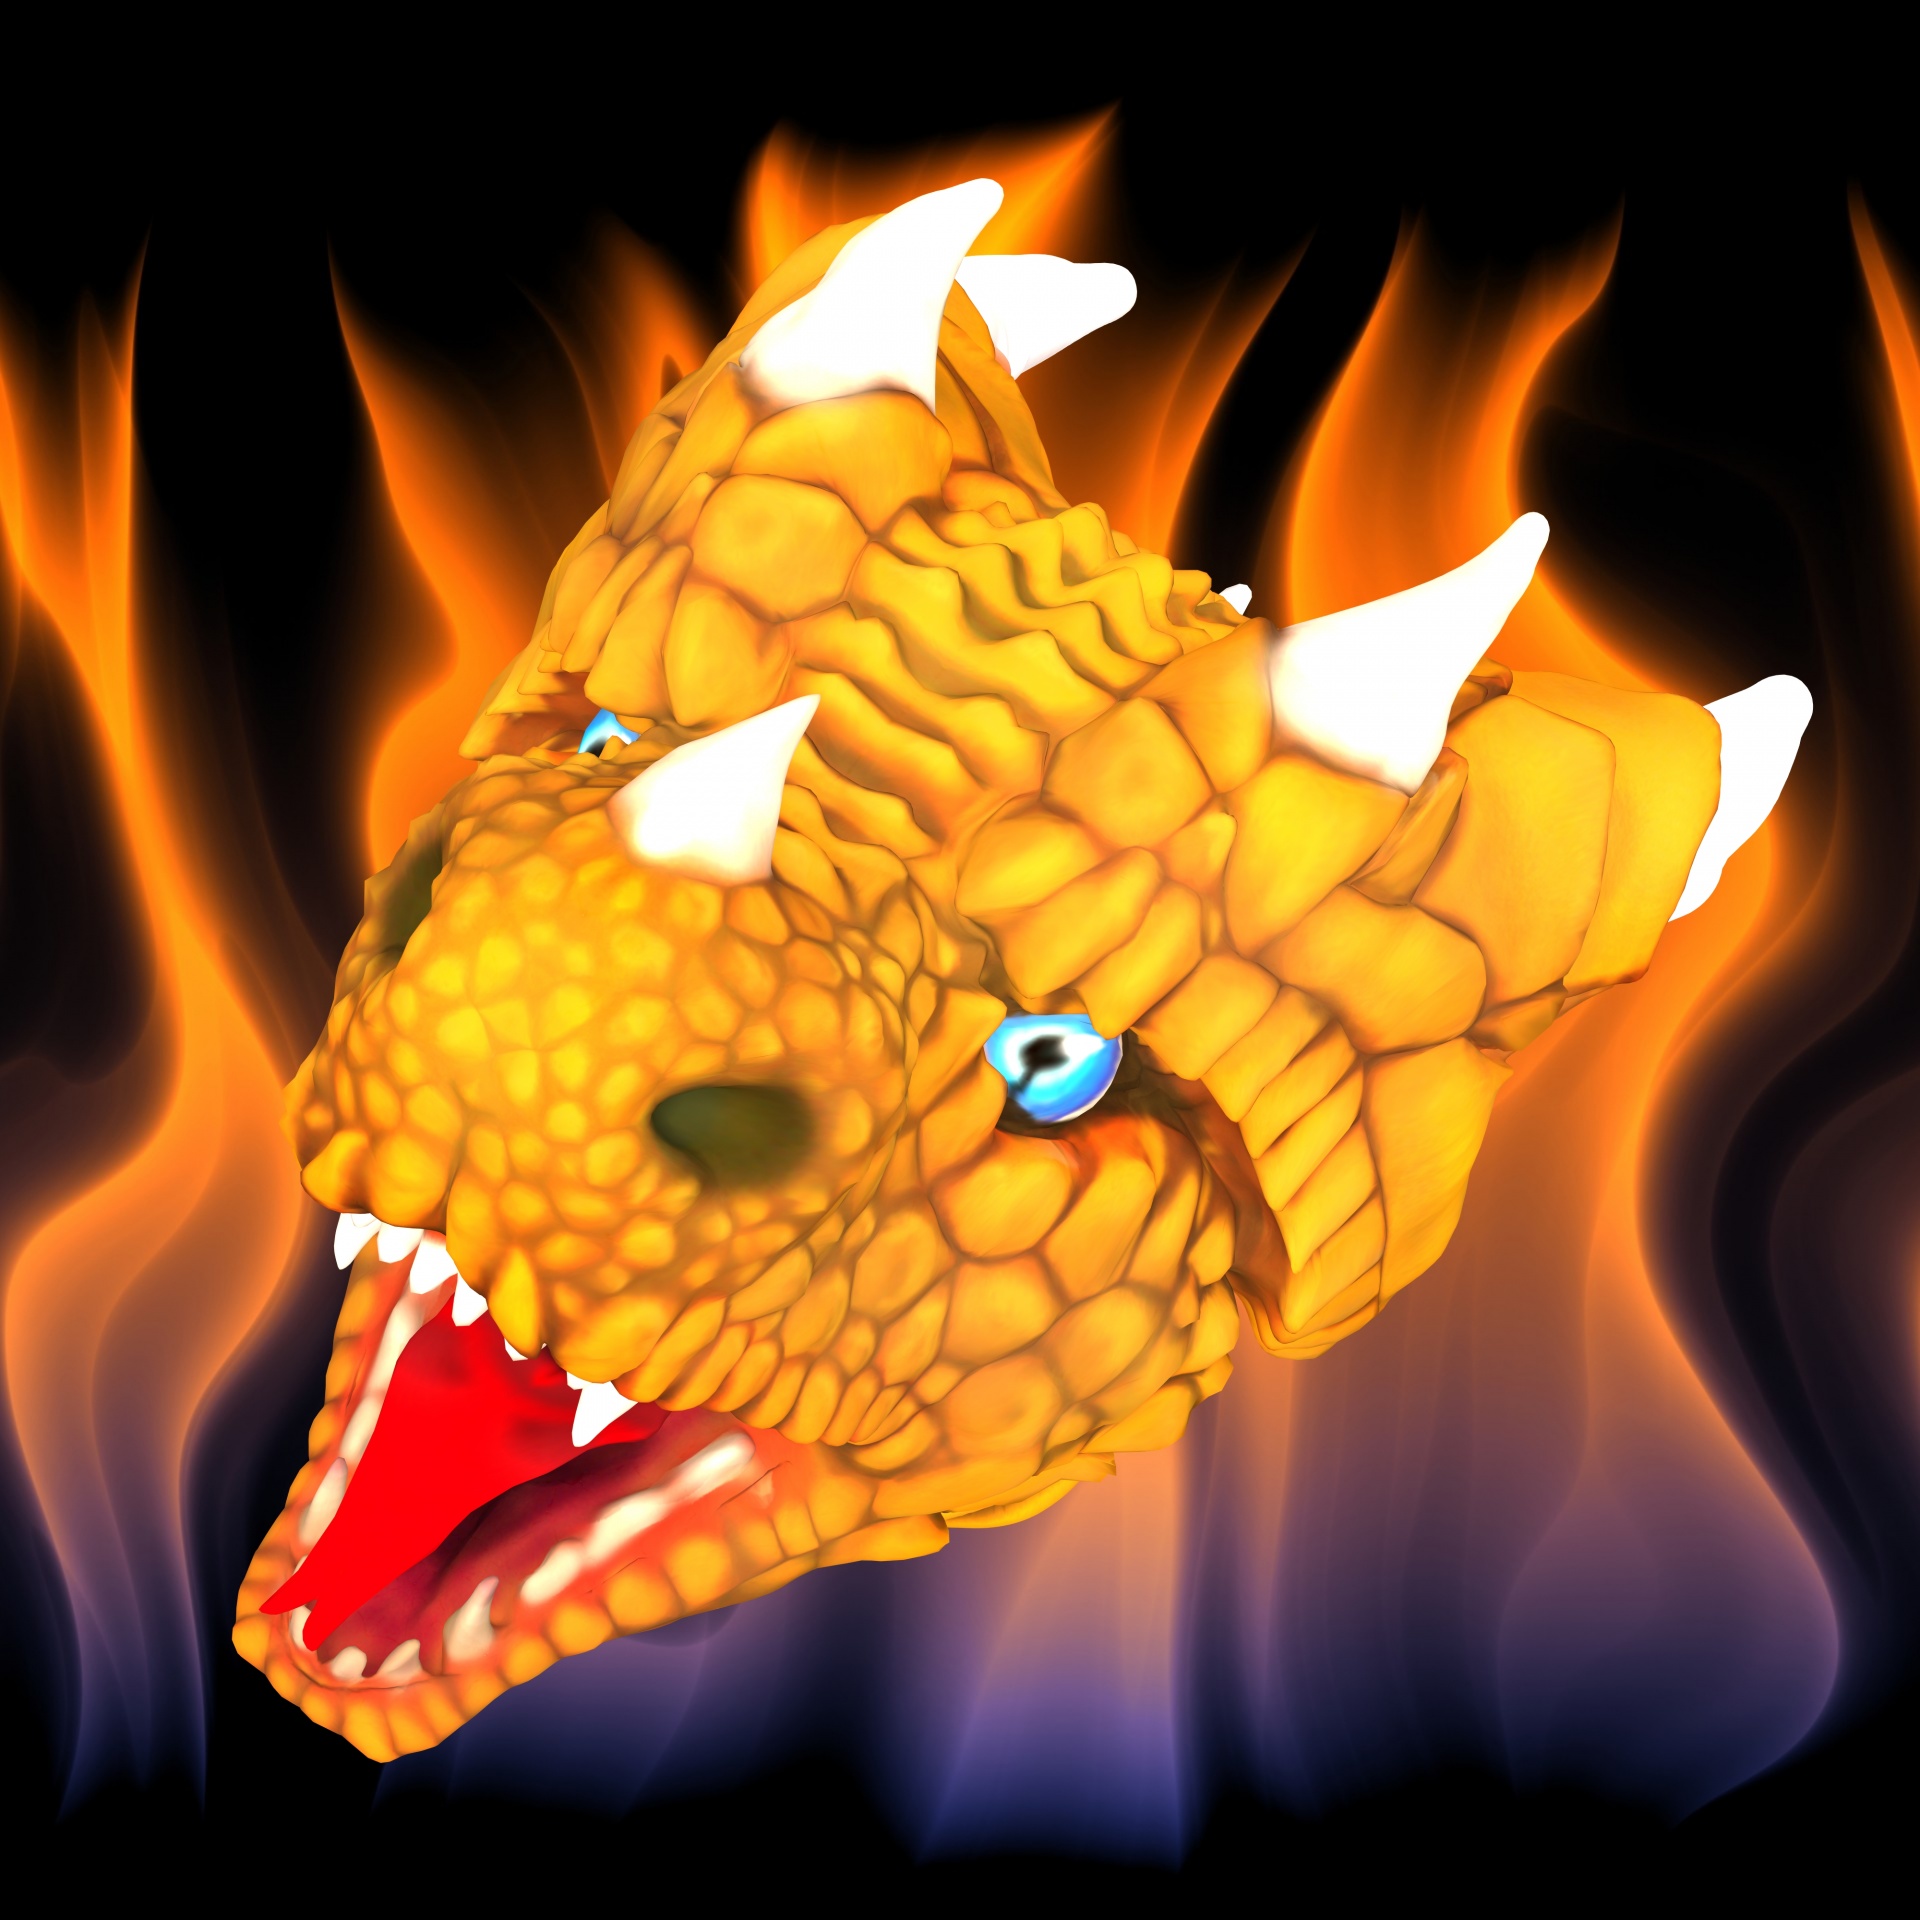 Dragon Head Royalty-Free Images, Stock Photos & Pictures